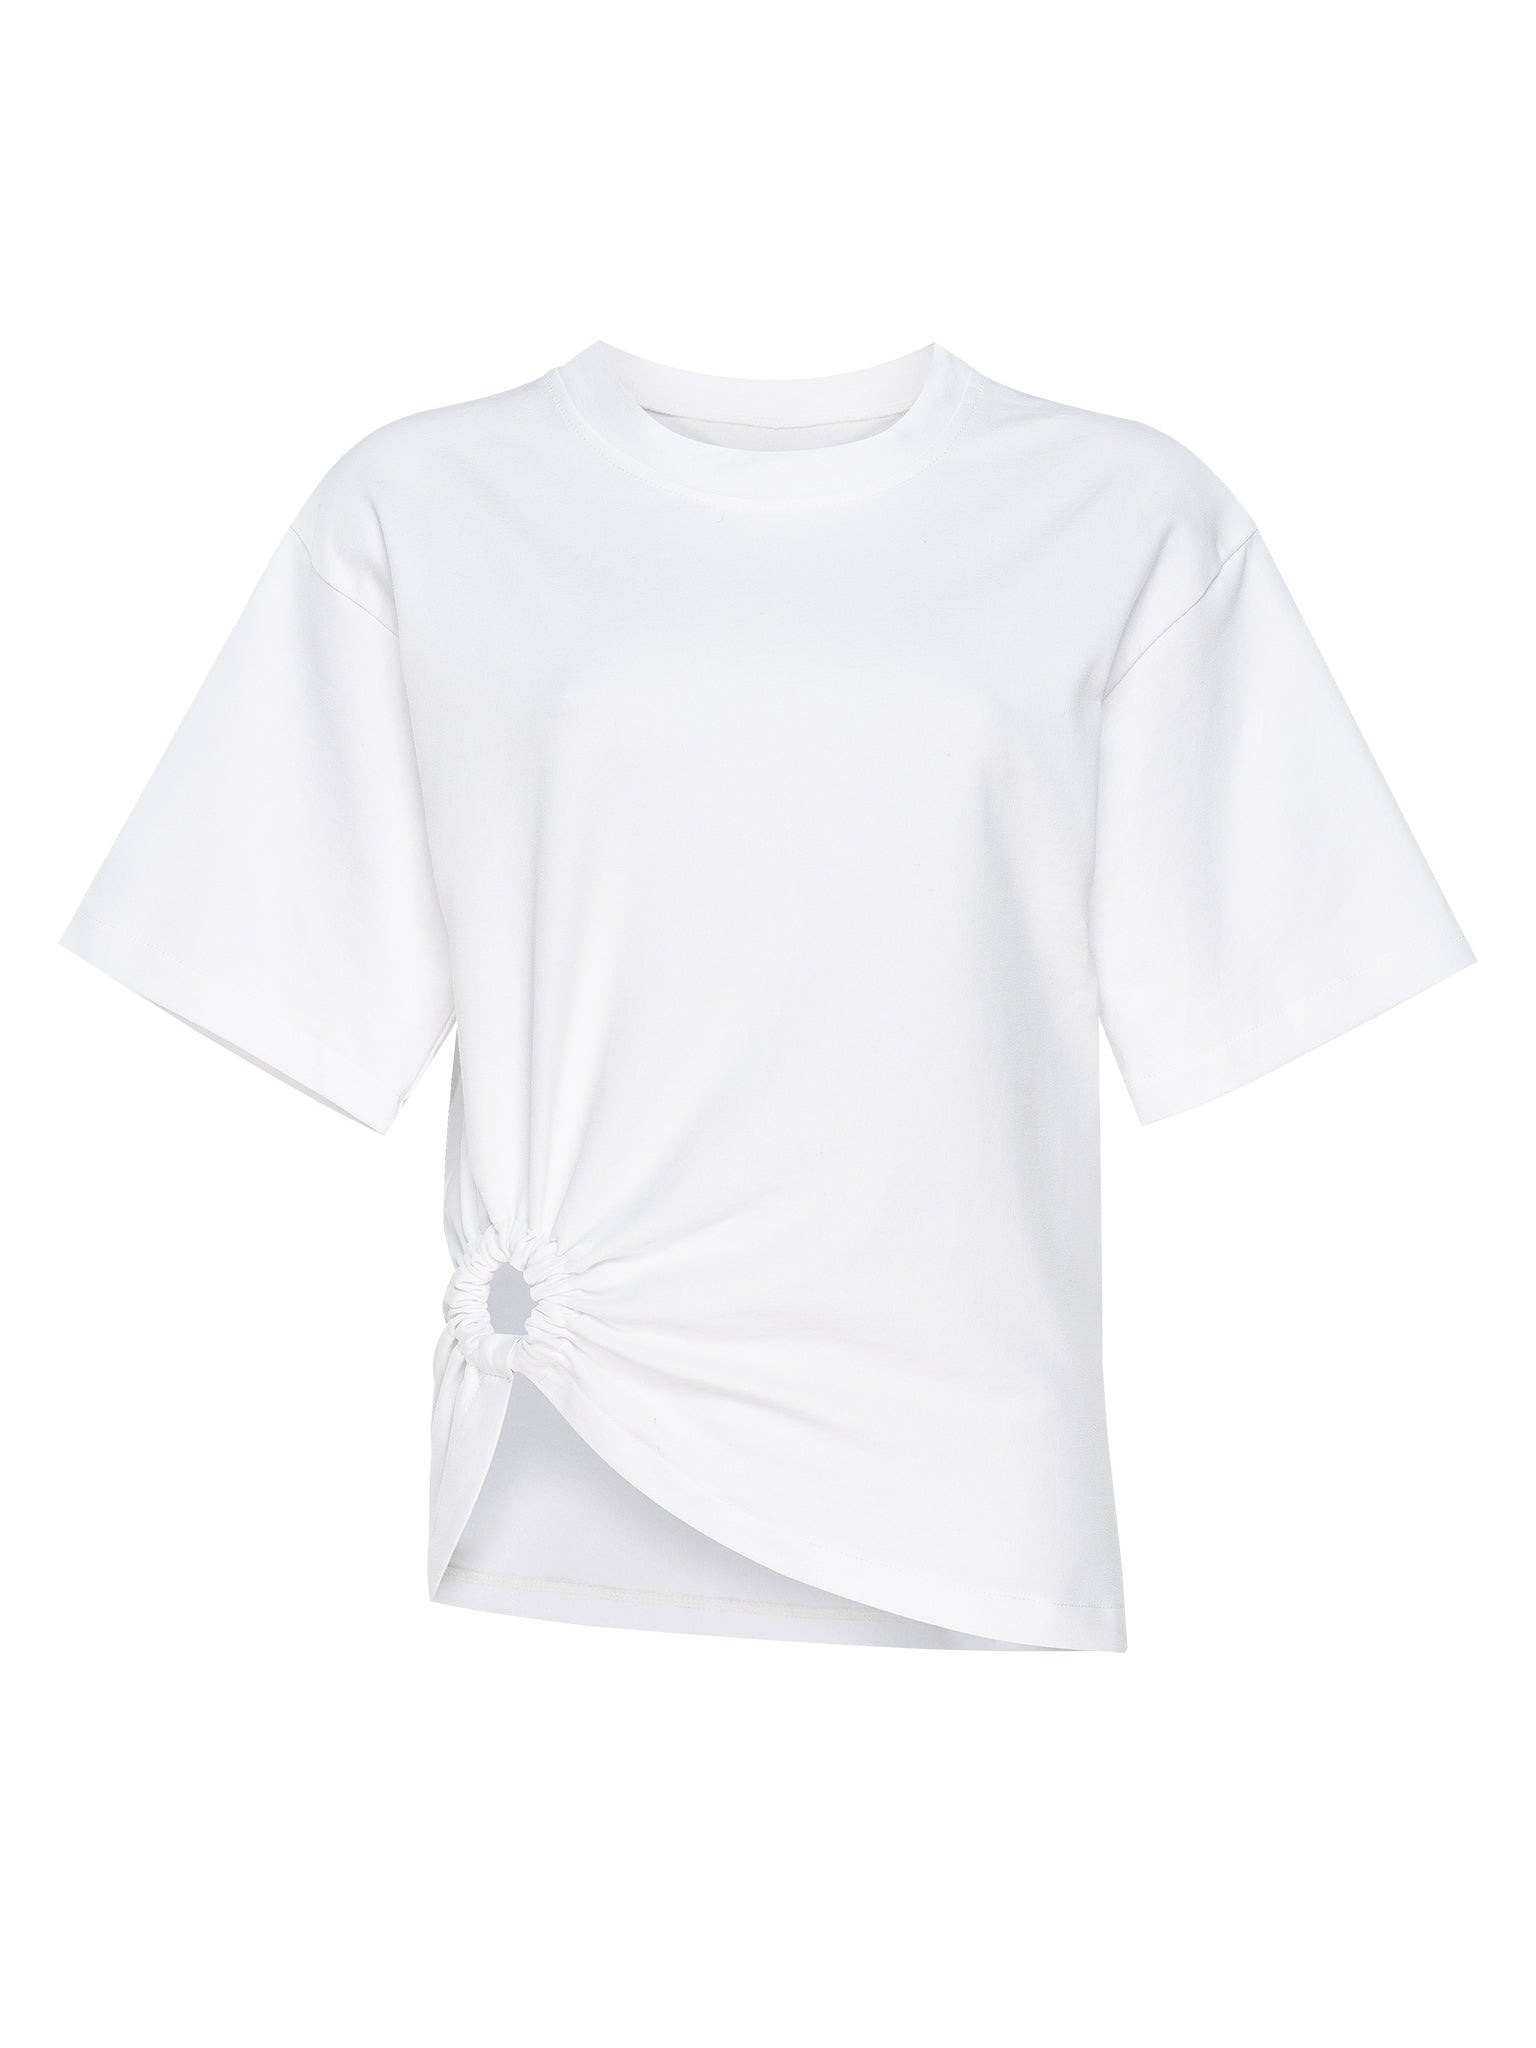 Side-wrap t-shirt in white color from ukrainian brand forma